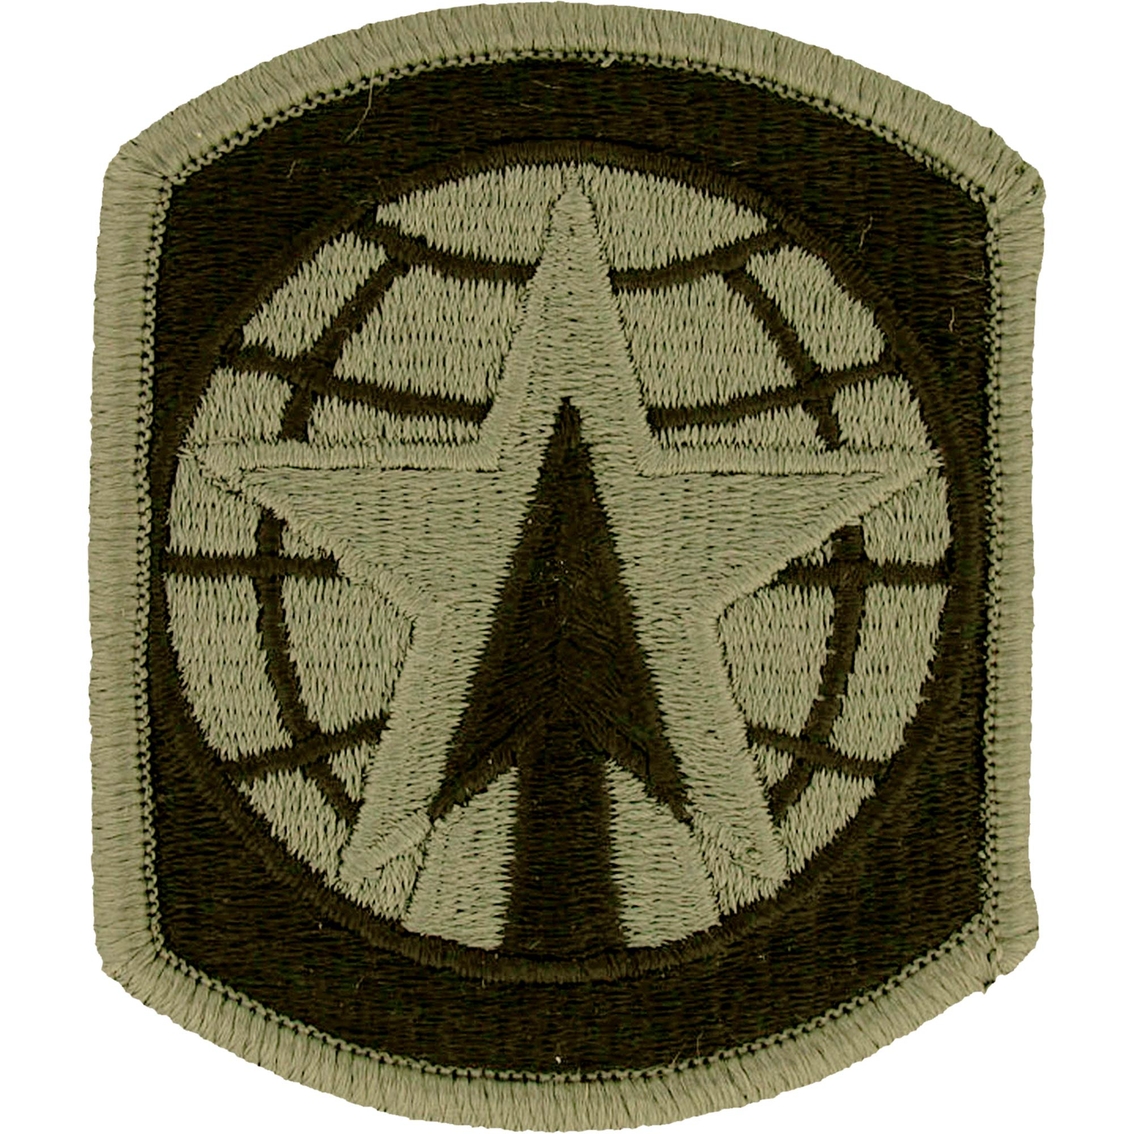 US ARMY Military Police Mp klett patch Hakenklett Ocp Multicam Acu Bagby green 